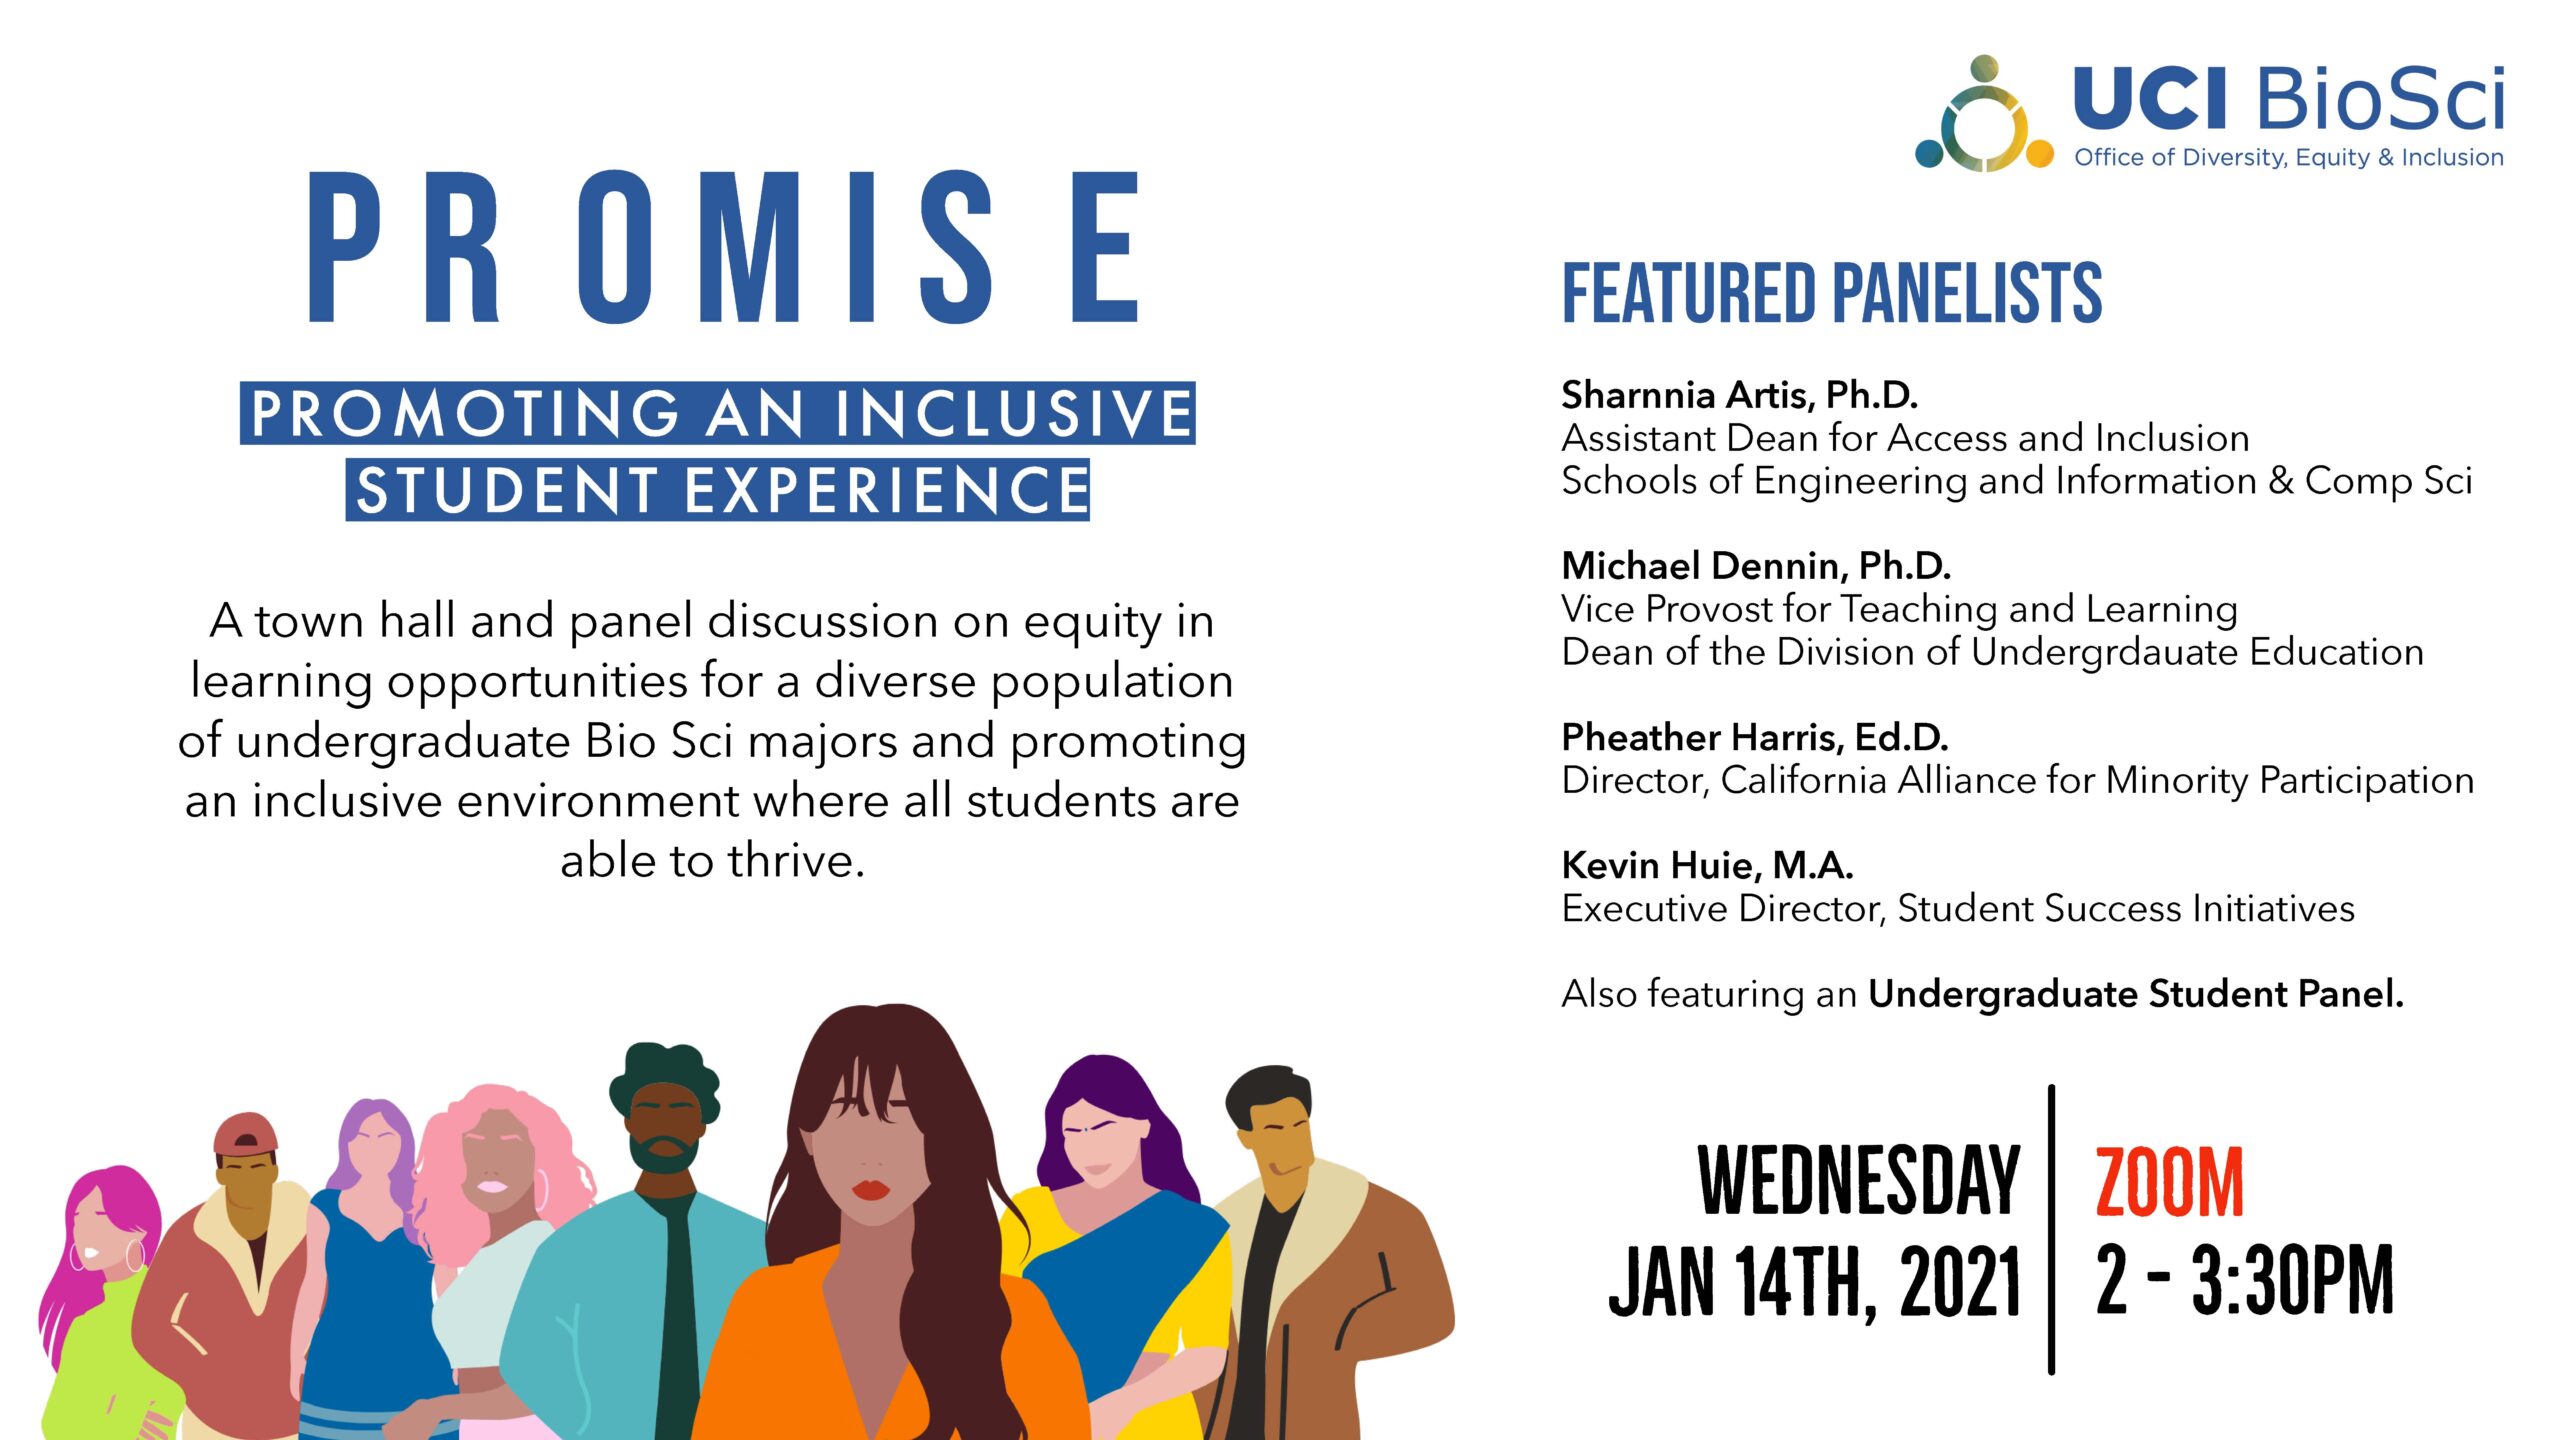 PROMISE event flyer for the 1/14/21 event.